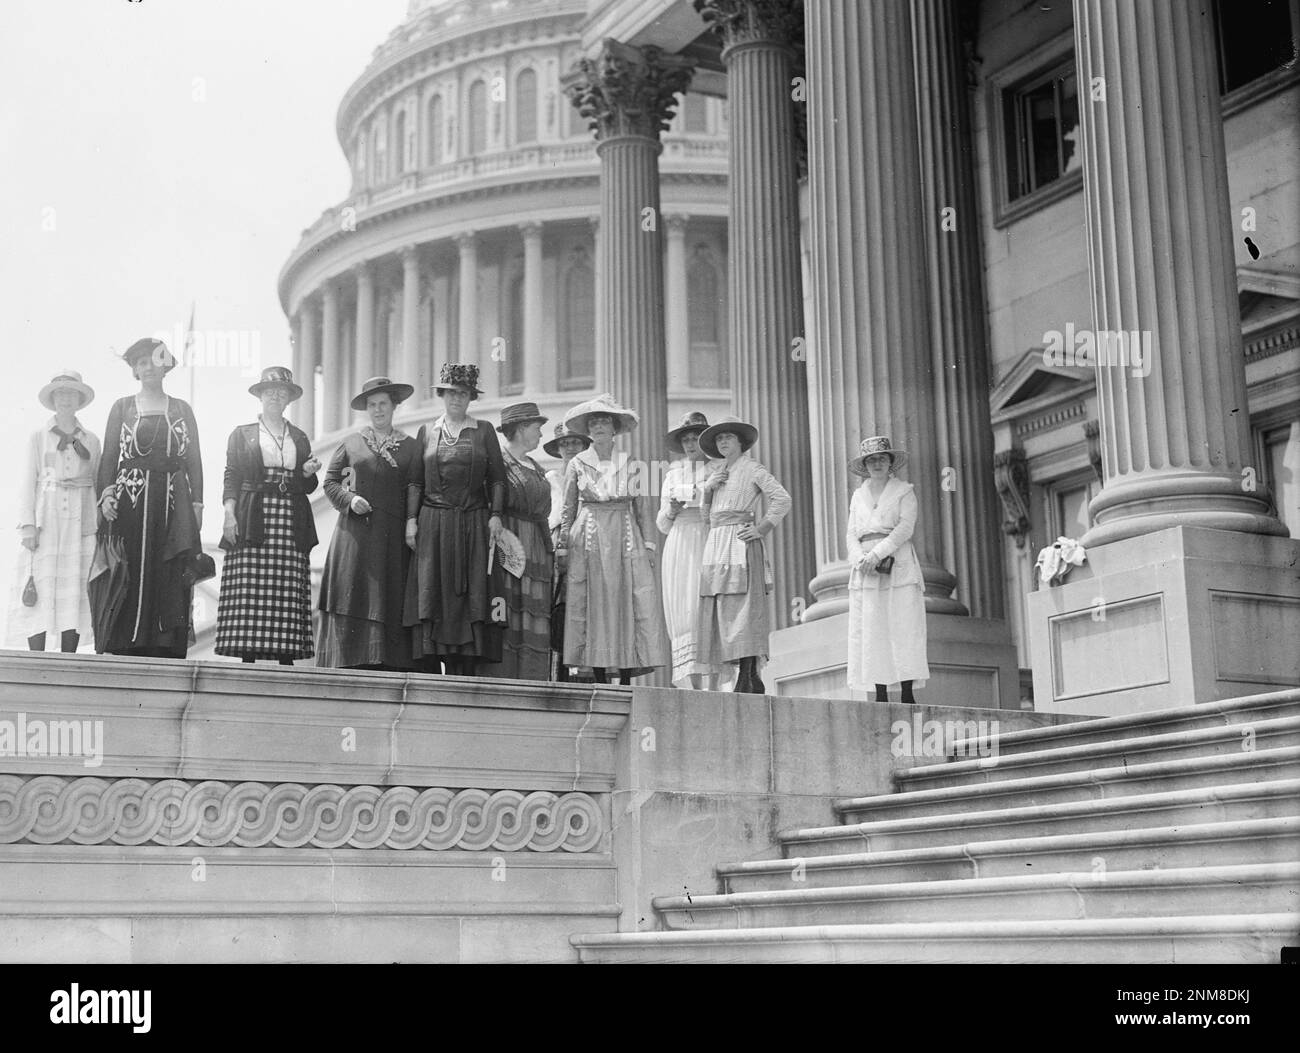 Members of the National Woman's Party Lobby Committee stand together outside the Capitol - 1919 Stock Photo